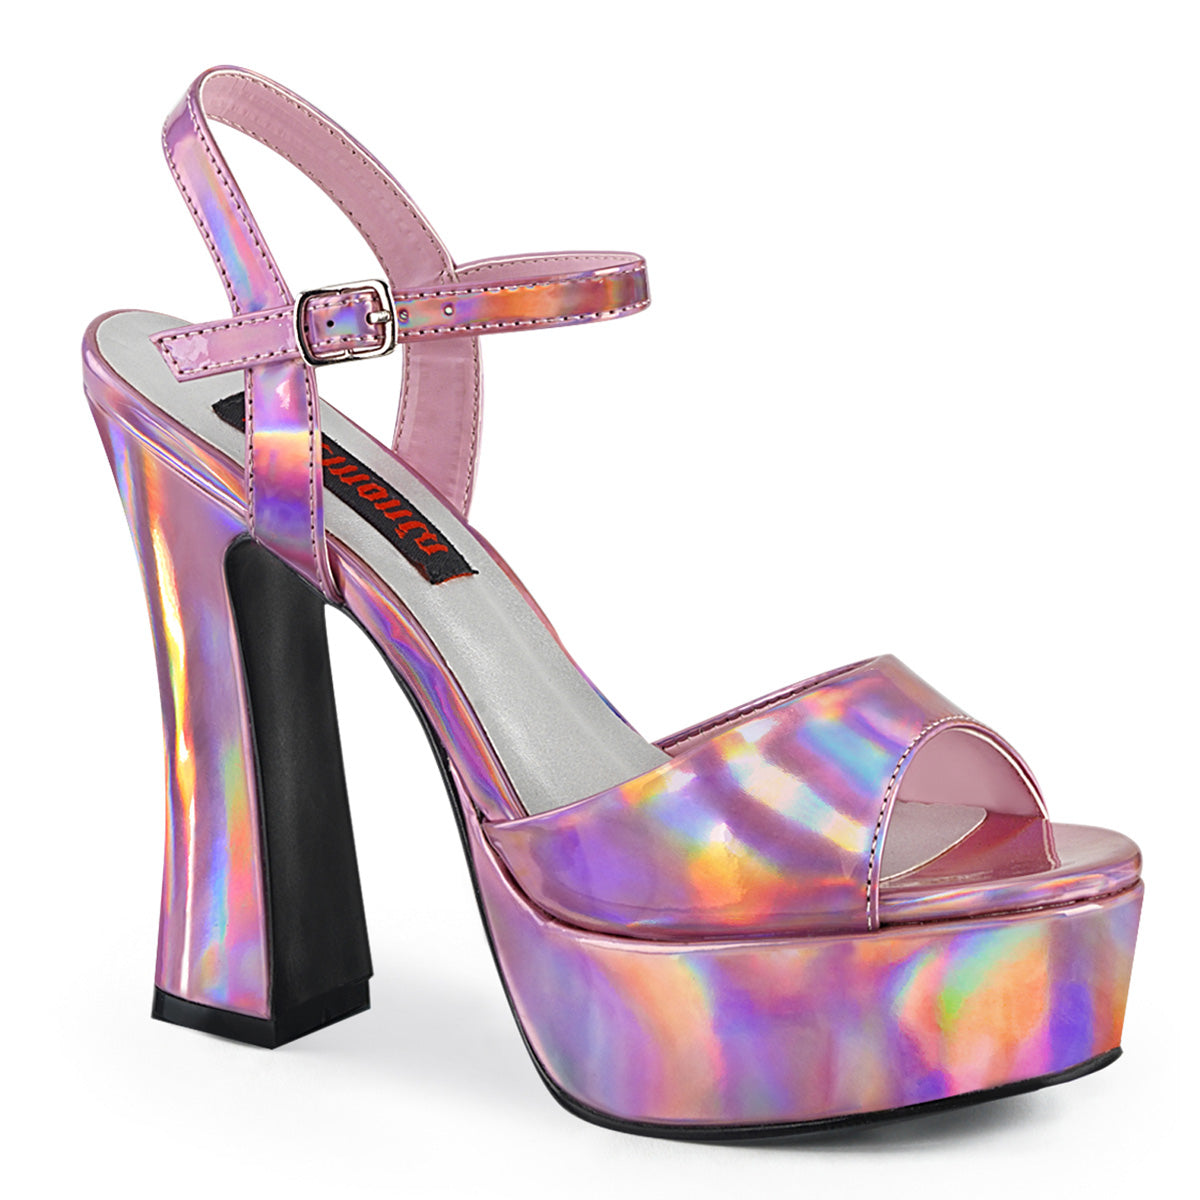 5" Chunky Heel DOLLY-09 Pink Hologram